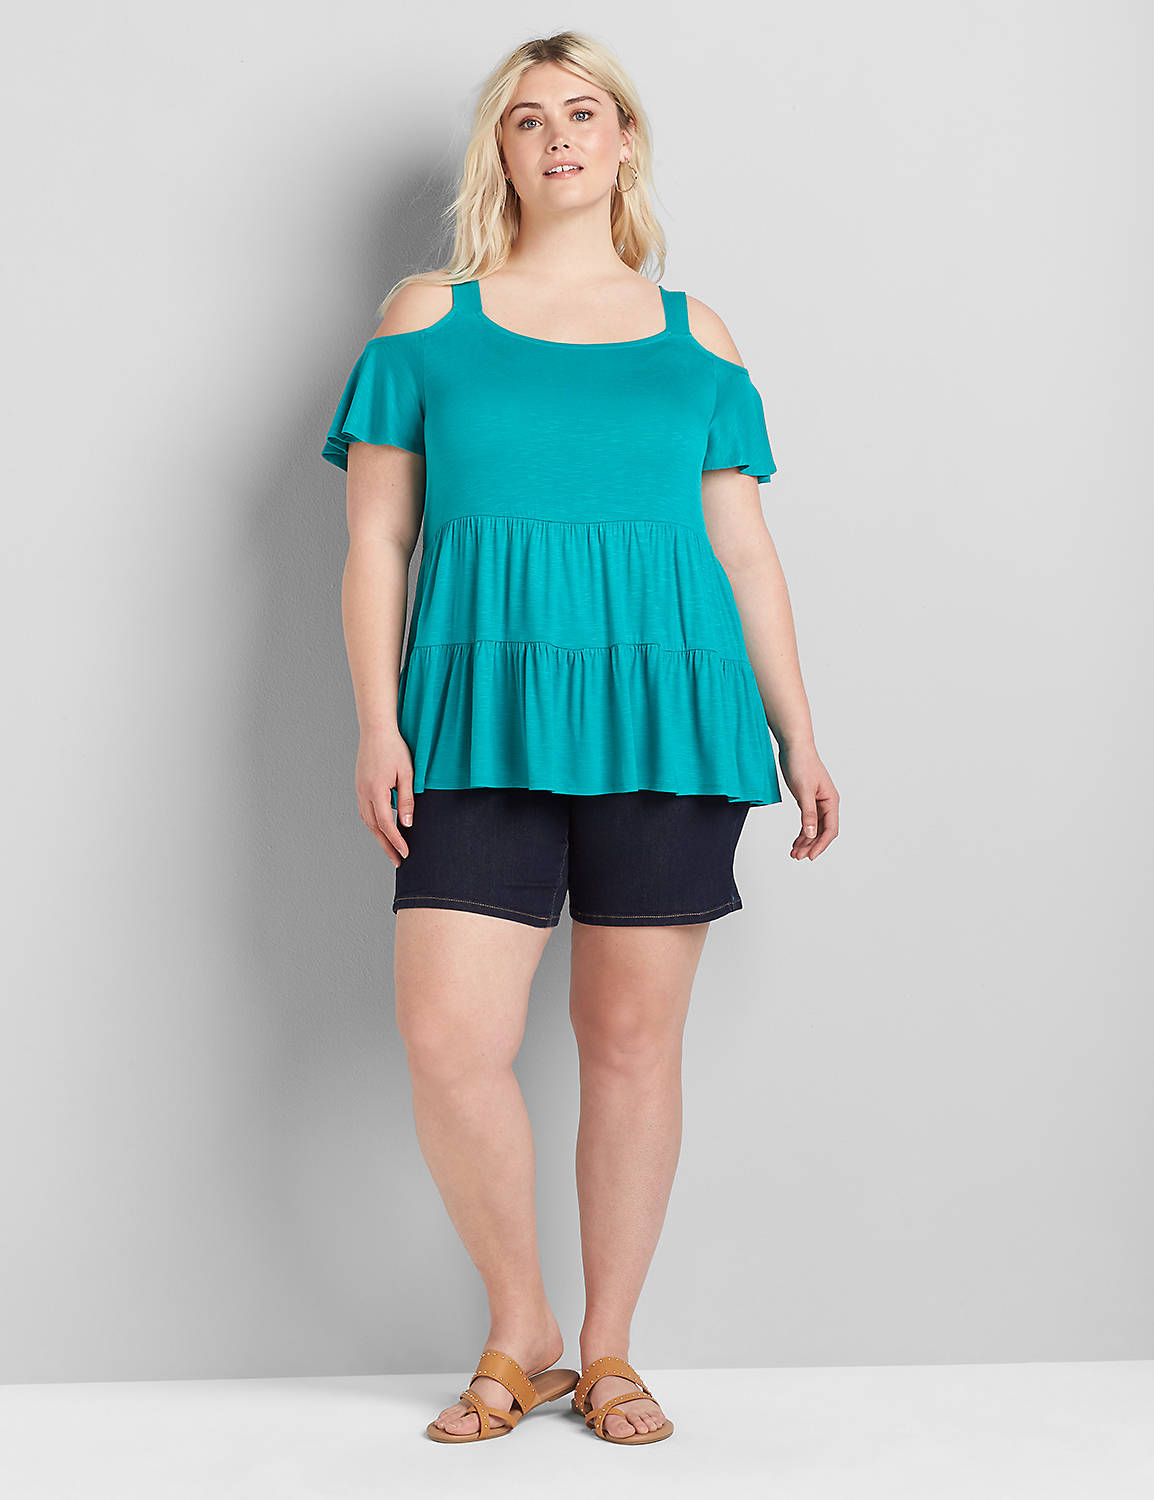 Cold-Shoulder Peplum Max Swing Tee Product Image 3